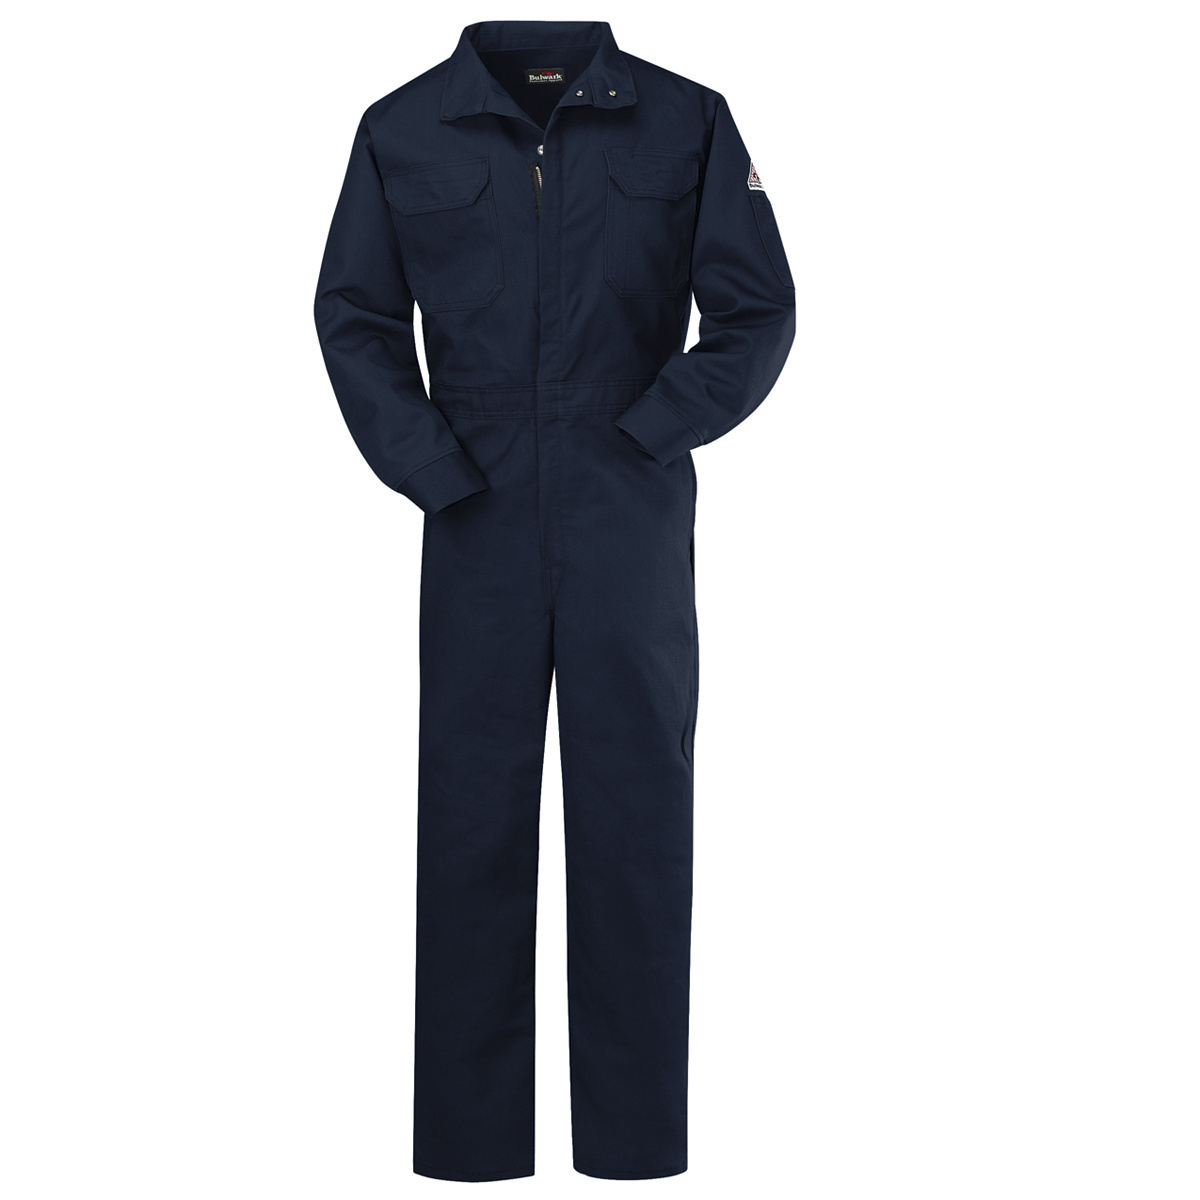 Bulwark® 40 Regular Navy Blue Westex Ultrasoft®/Cotton/Nylon Flame Resistant Coveralls With Zipper Front Closure